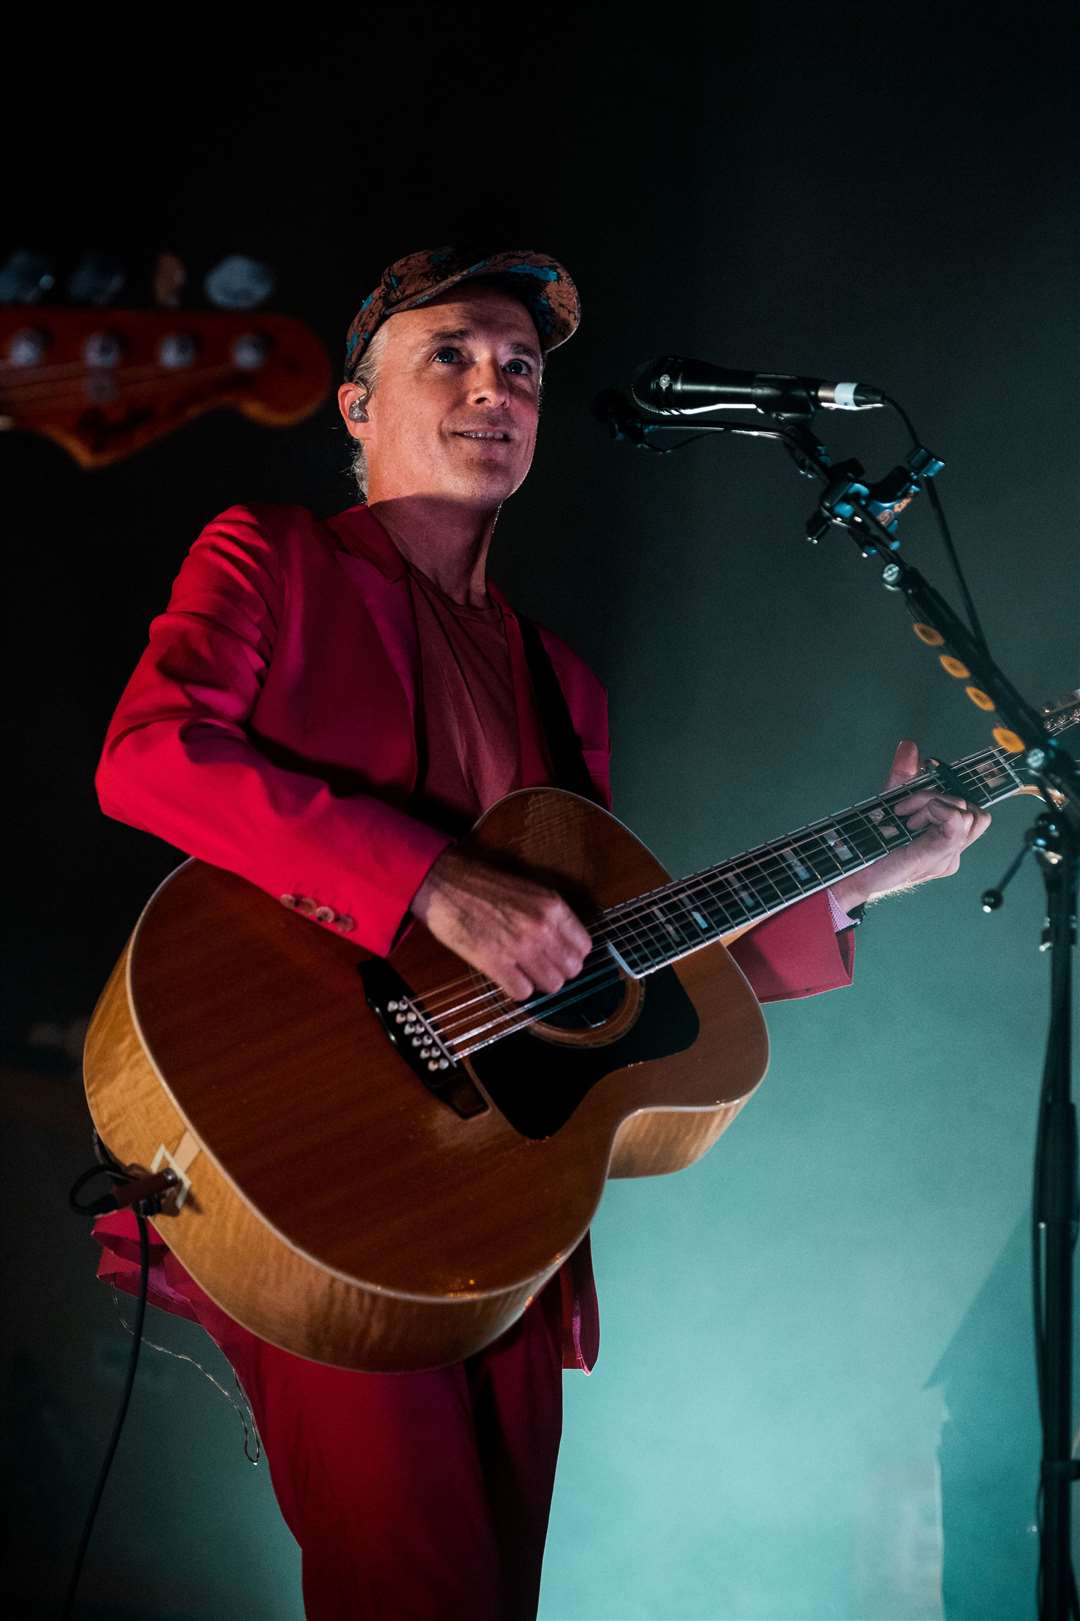 Fran Healy spoke about recording The Invisible Band album and experiencing the passage of time. Picture: Richard Frew Photography